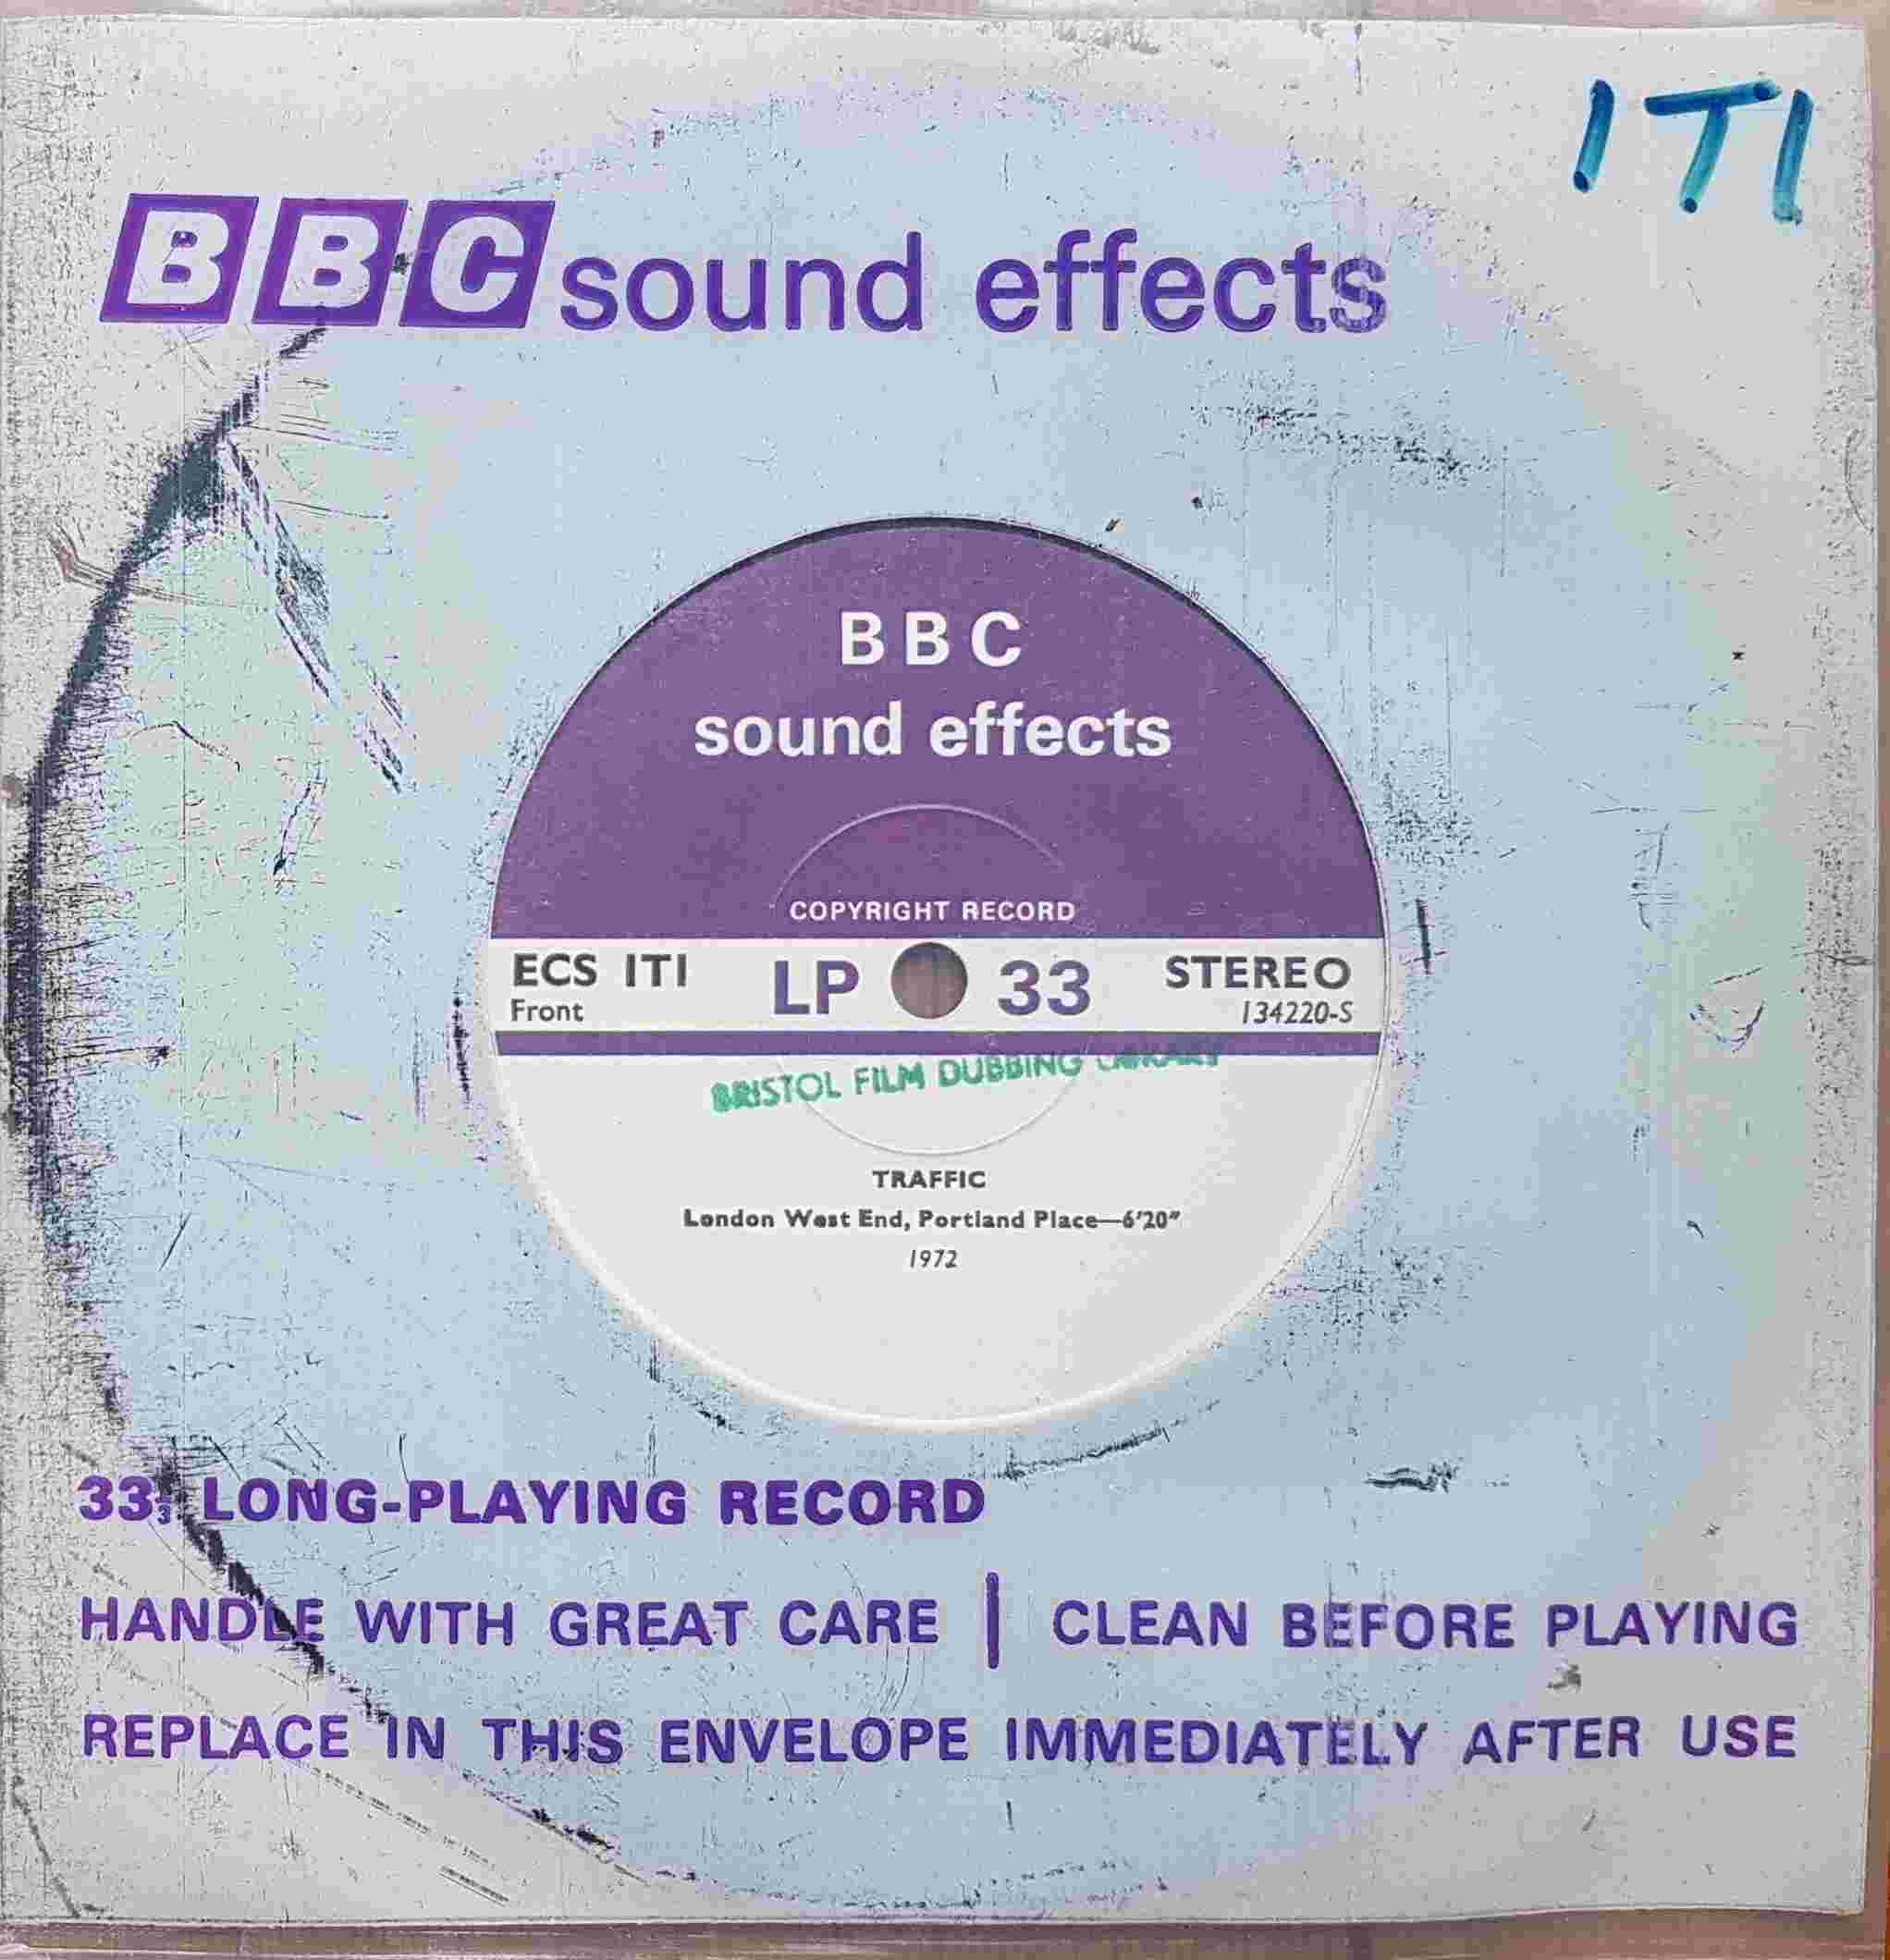 Picture of ECS 1T1 Traffic by artist Not registered from the BBC singles - Records and Tapes library